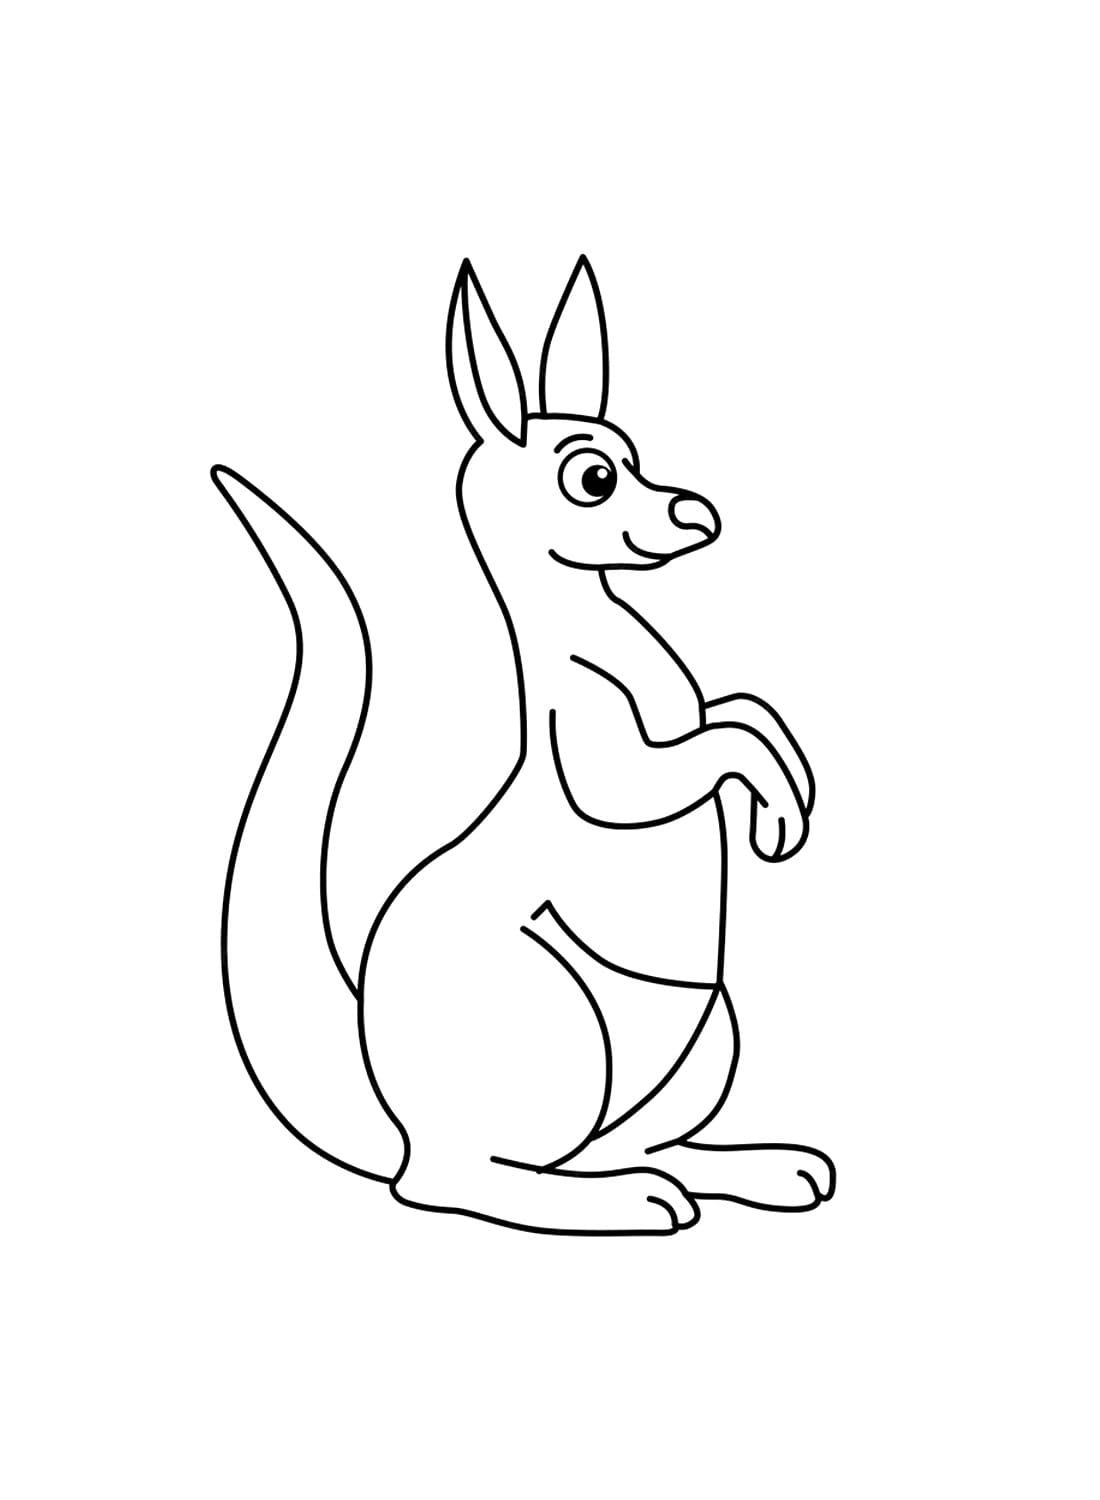 Cartoon Kangaroo coloring page Download, Print or Color Online for Free